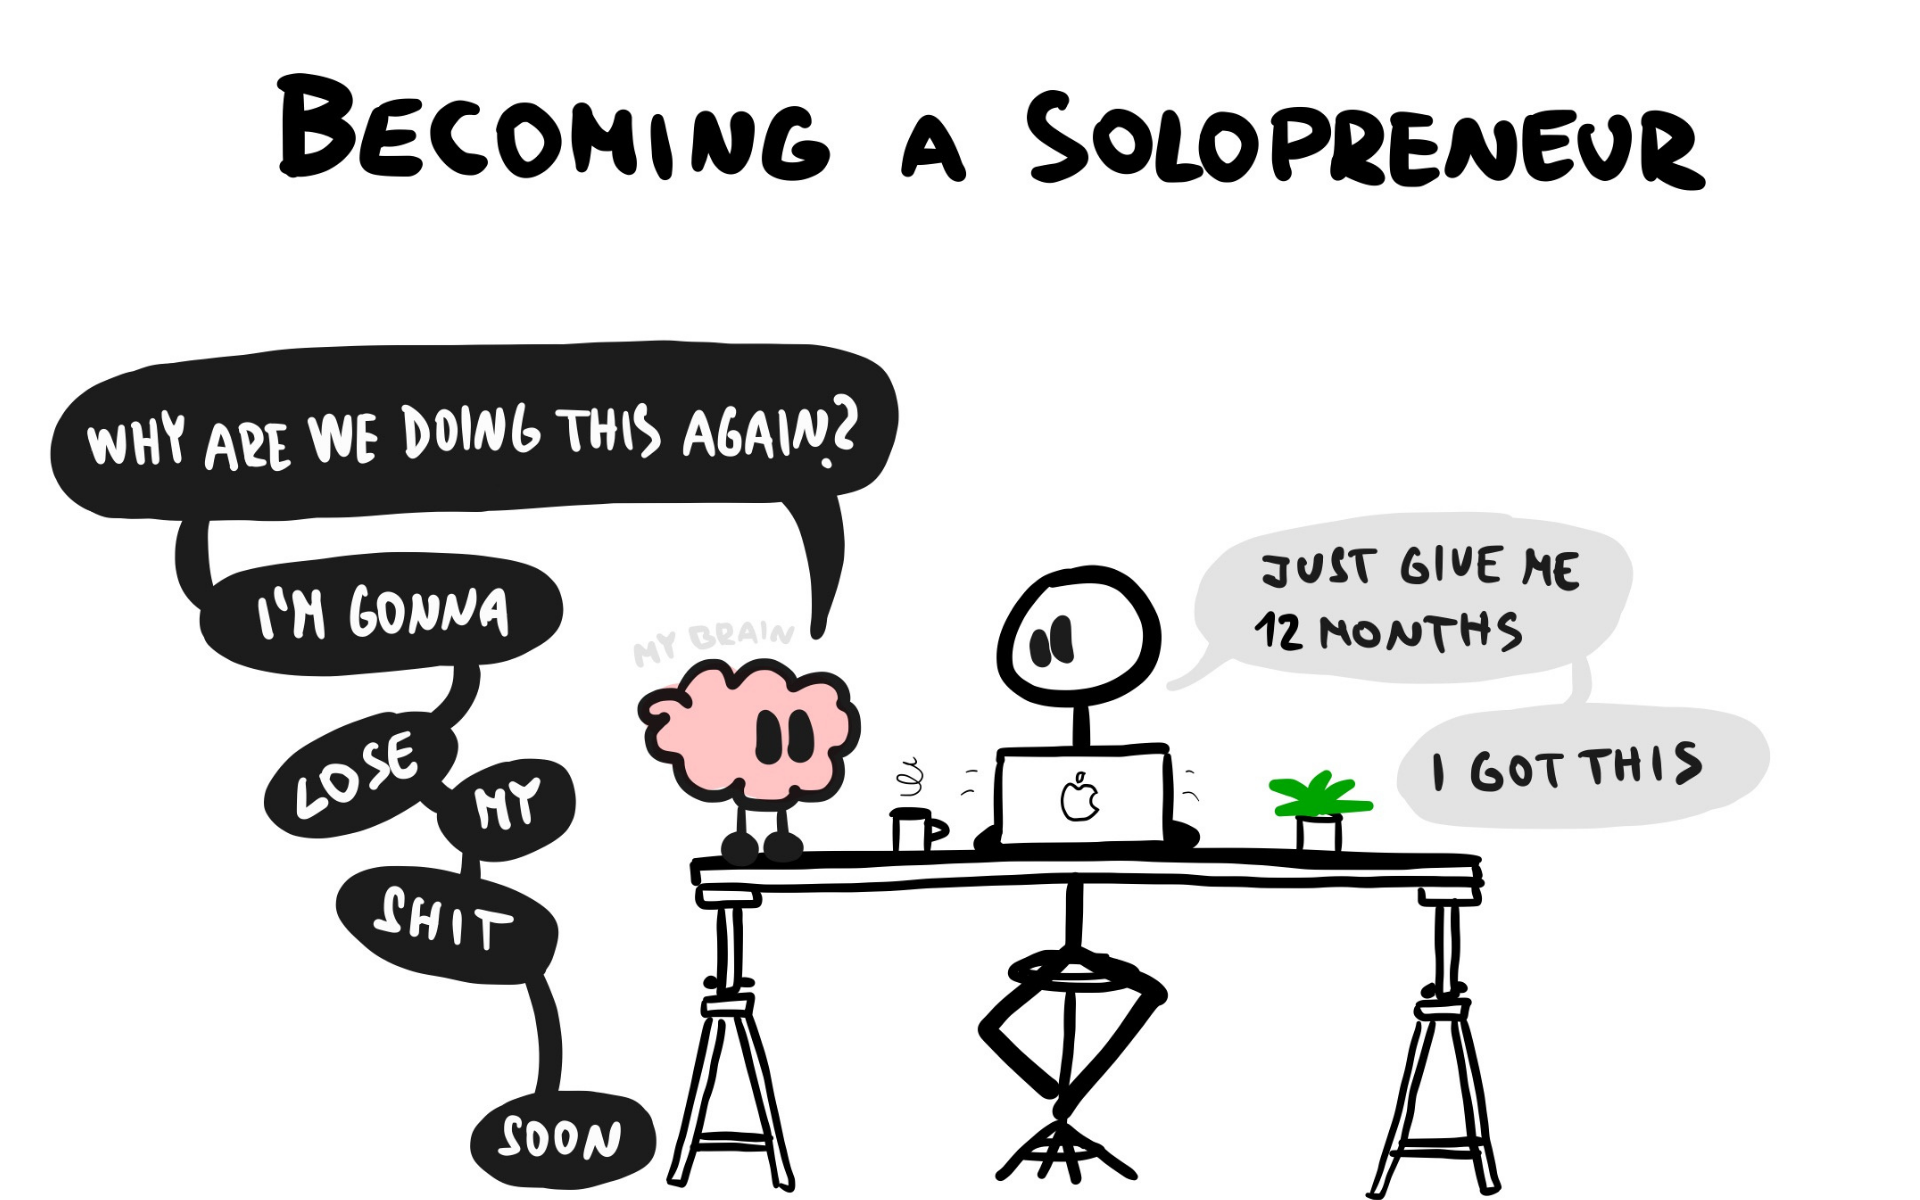 Becoming a solopreneur